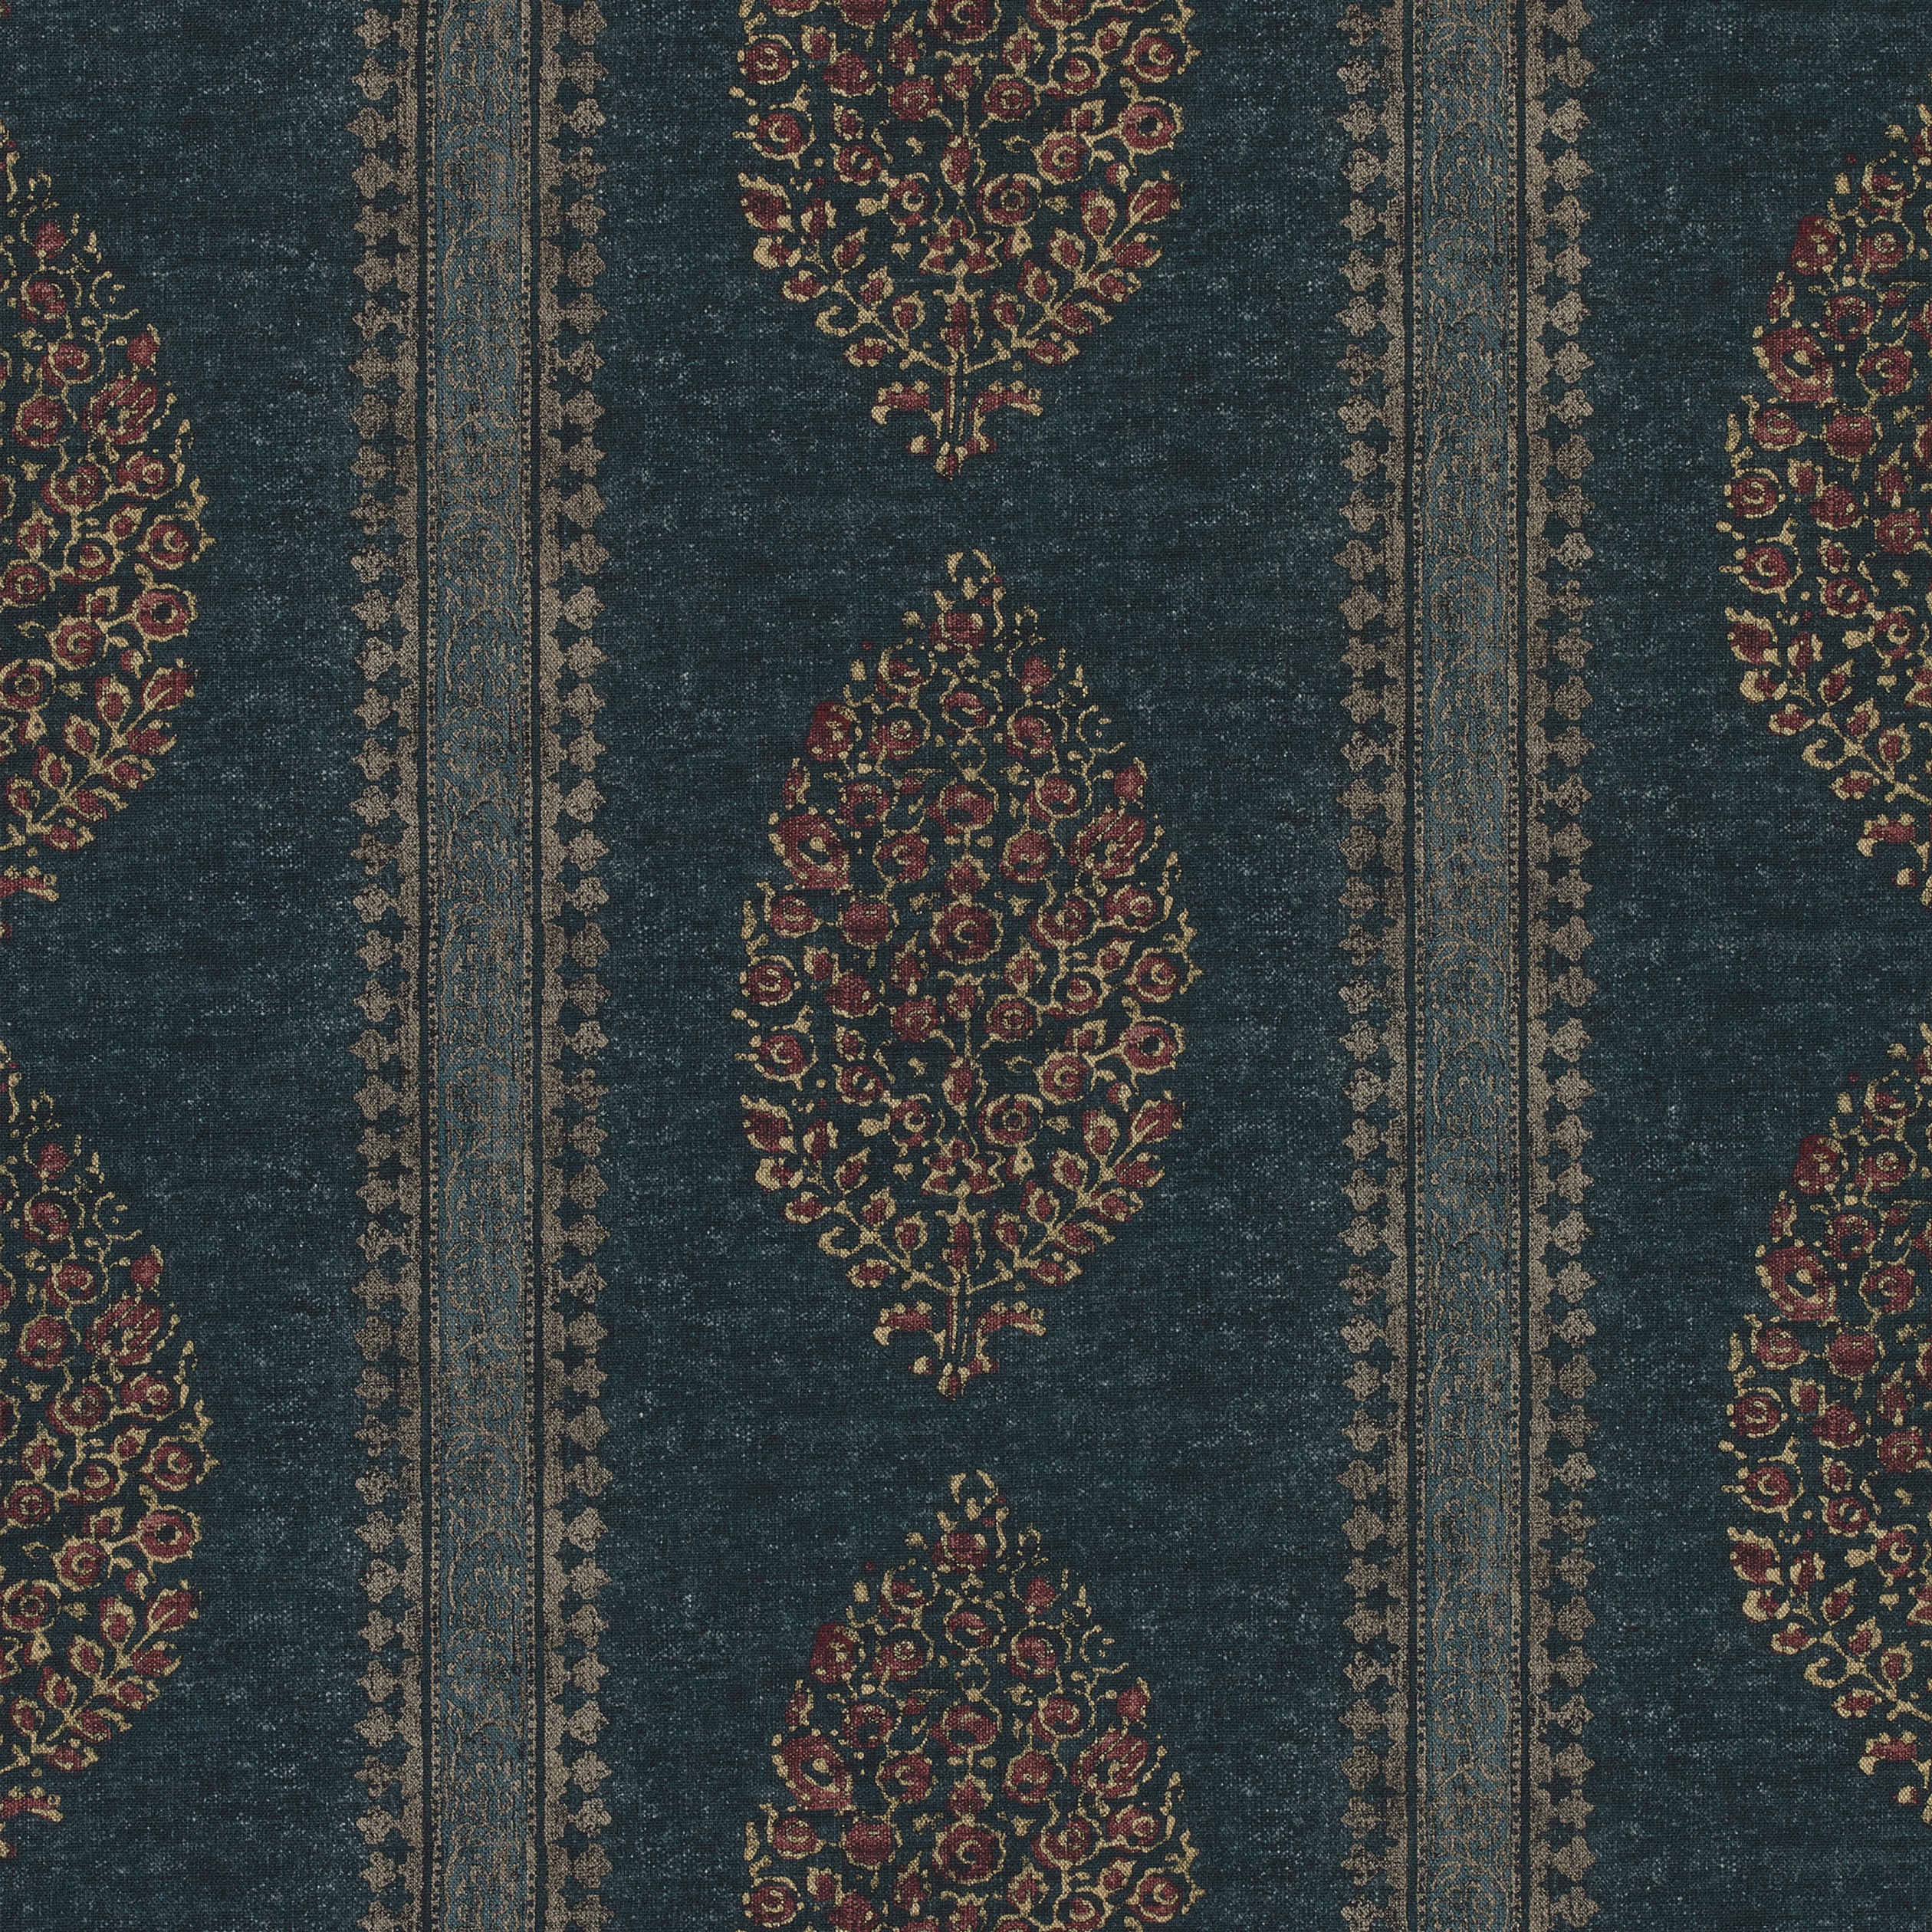 Chappana fabric in navy and red color - pattern number F910238 - by Thibaut in the Colony collection